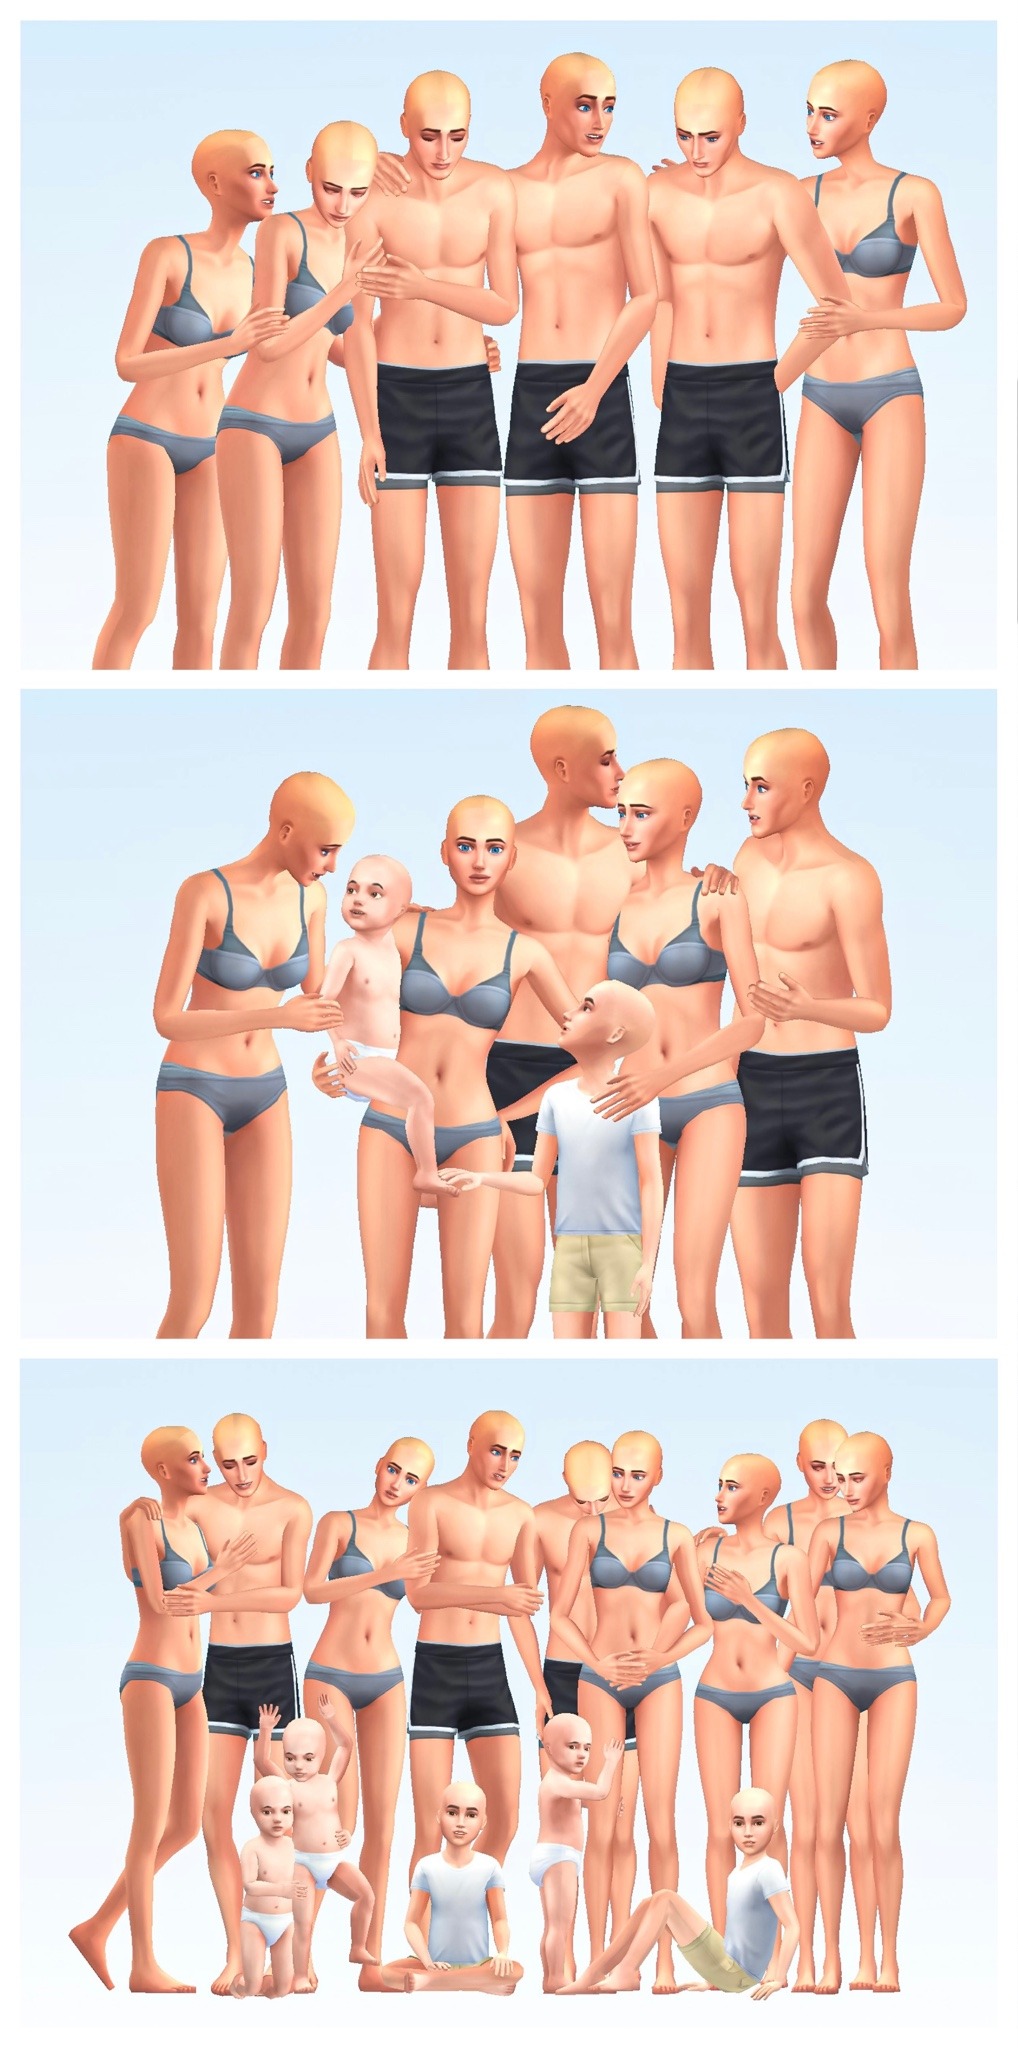 Playing with poses in The Sims 4